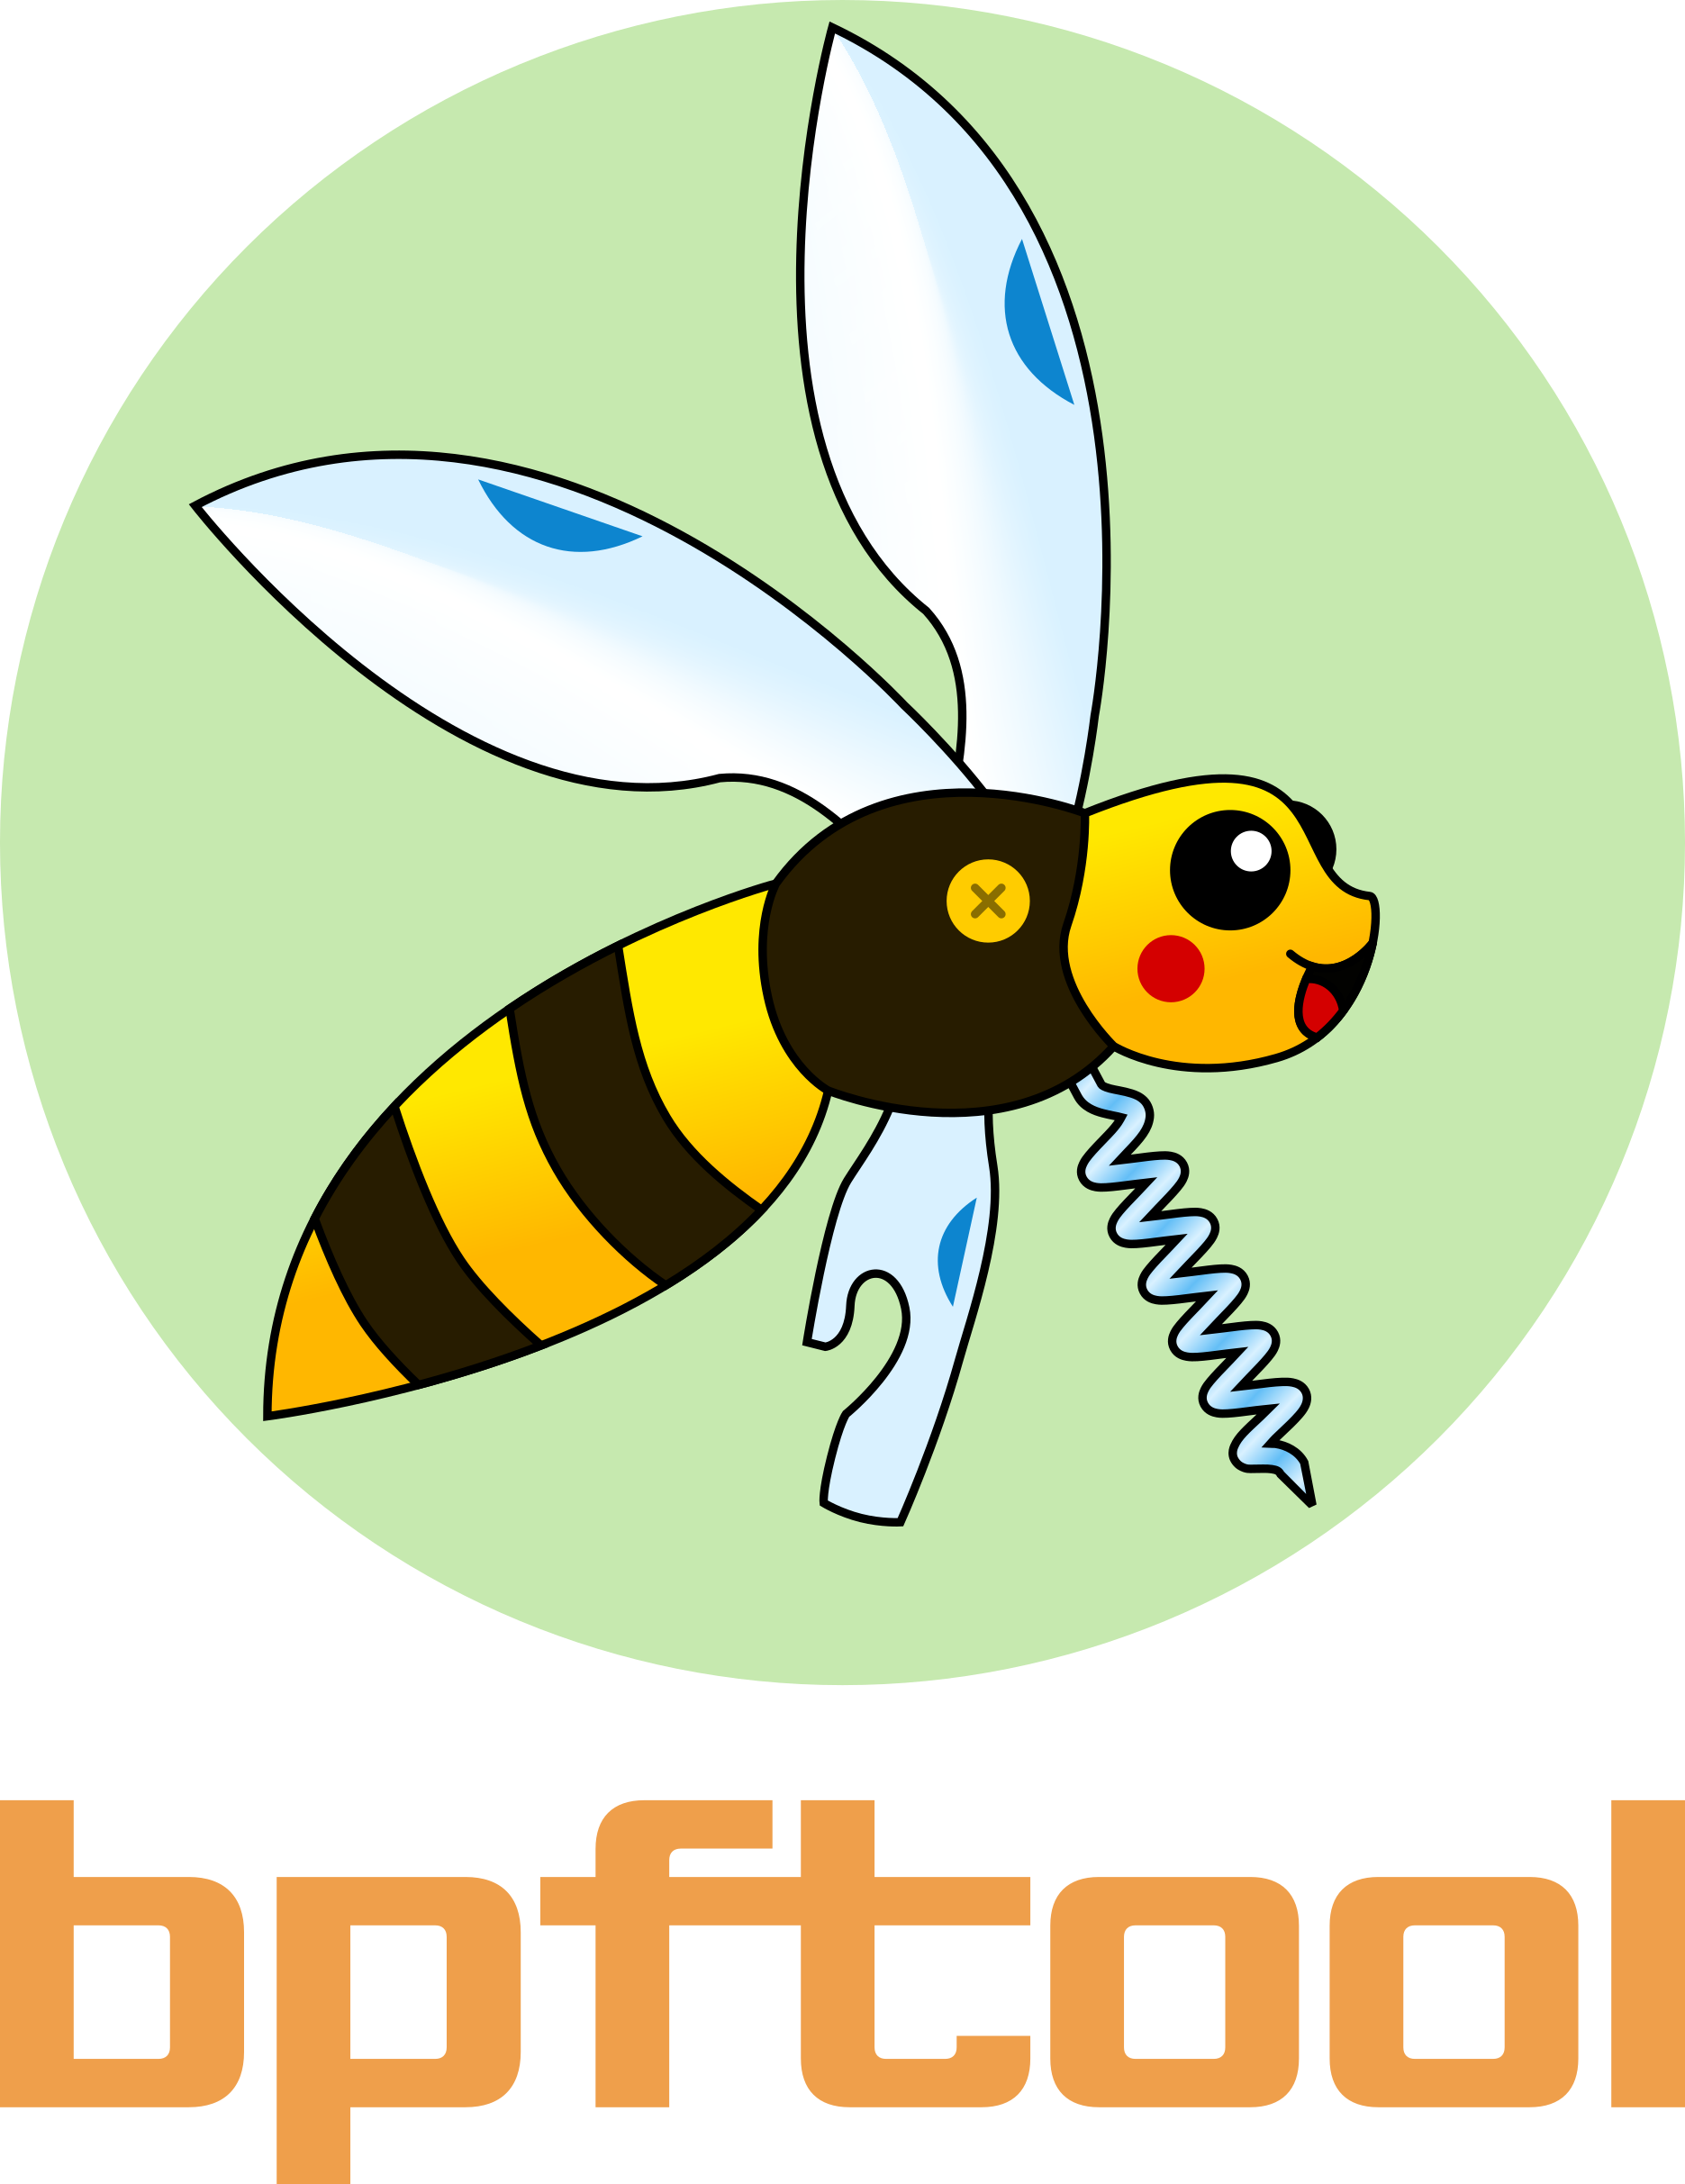 A Swiss-army knife shaped as a bee, with the wings as blades, and a cute head